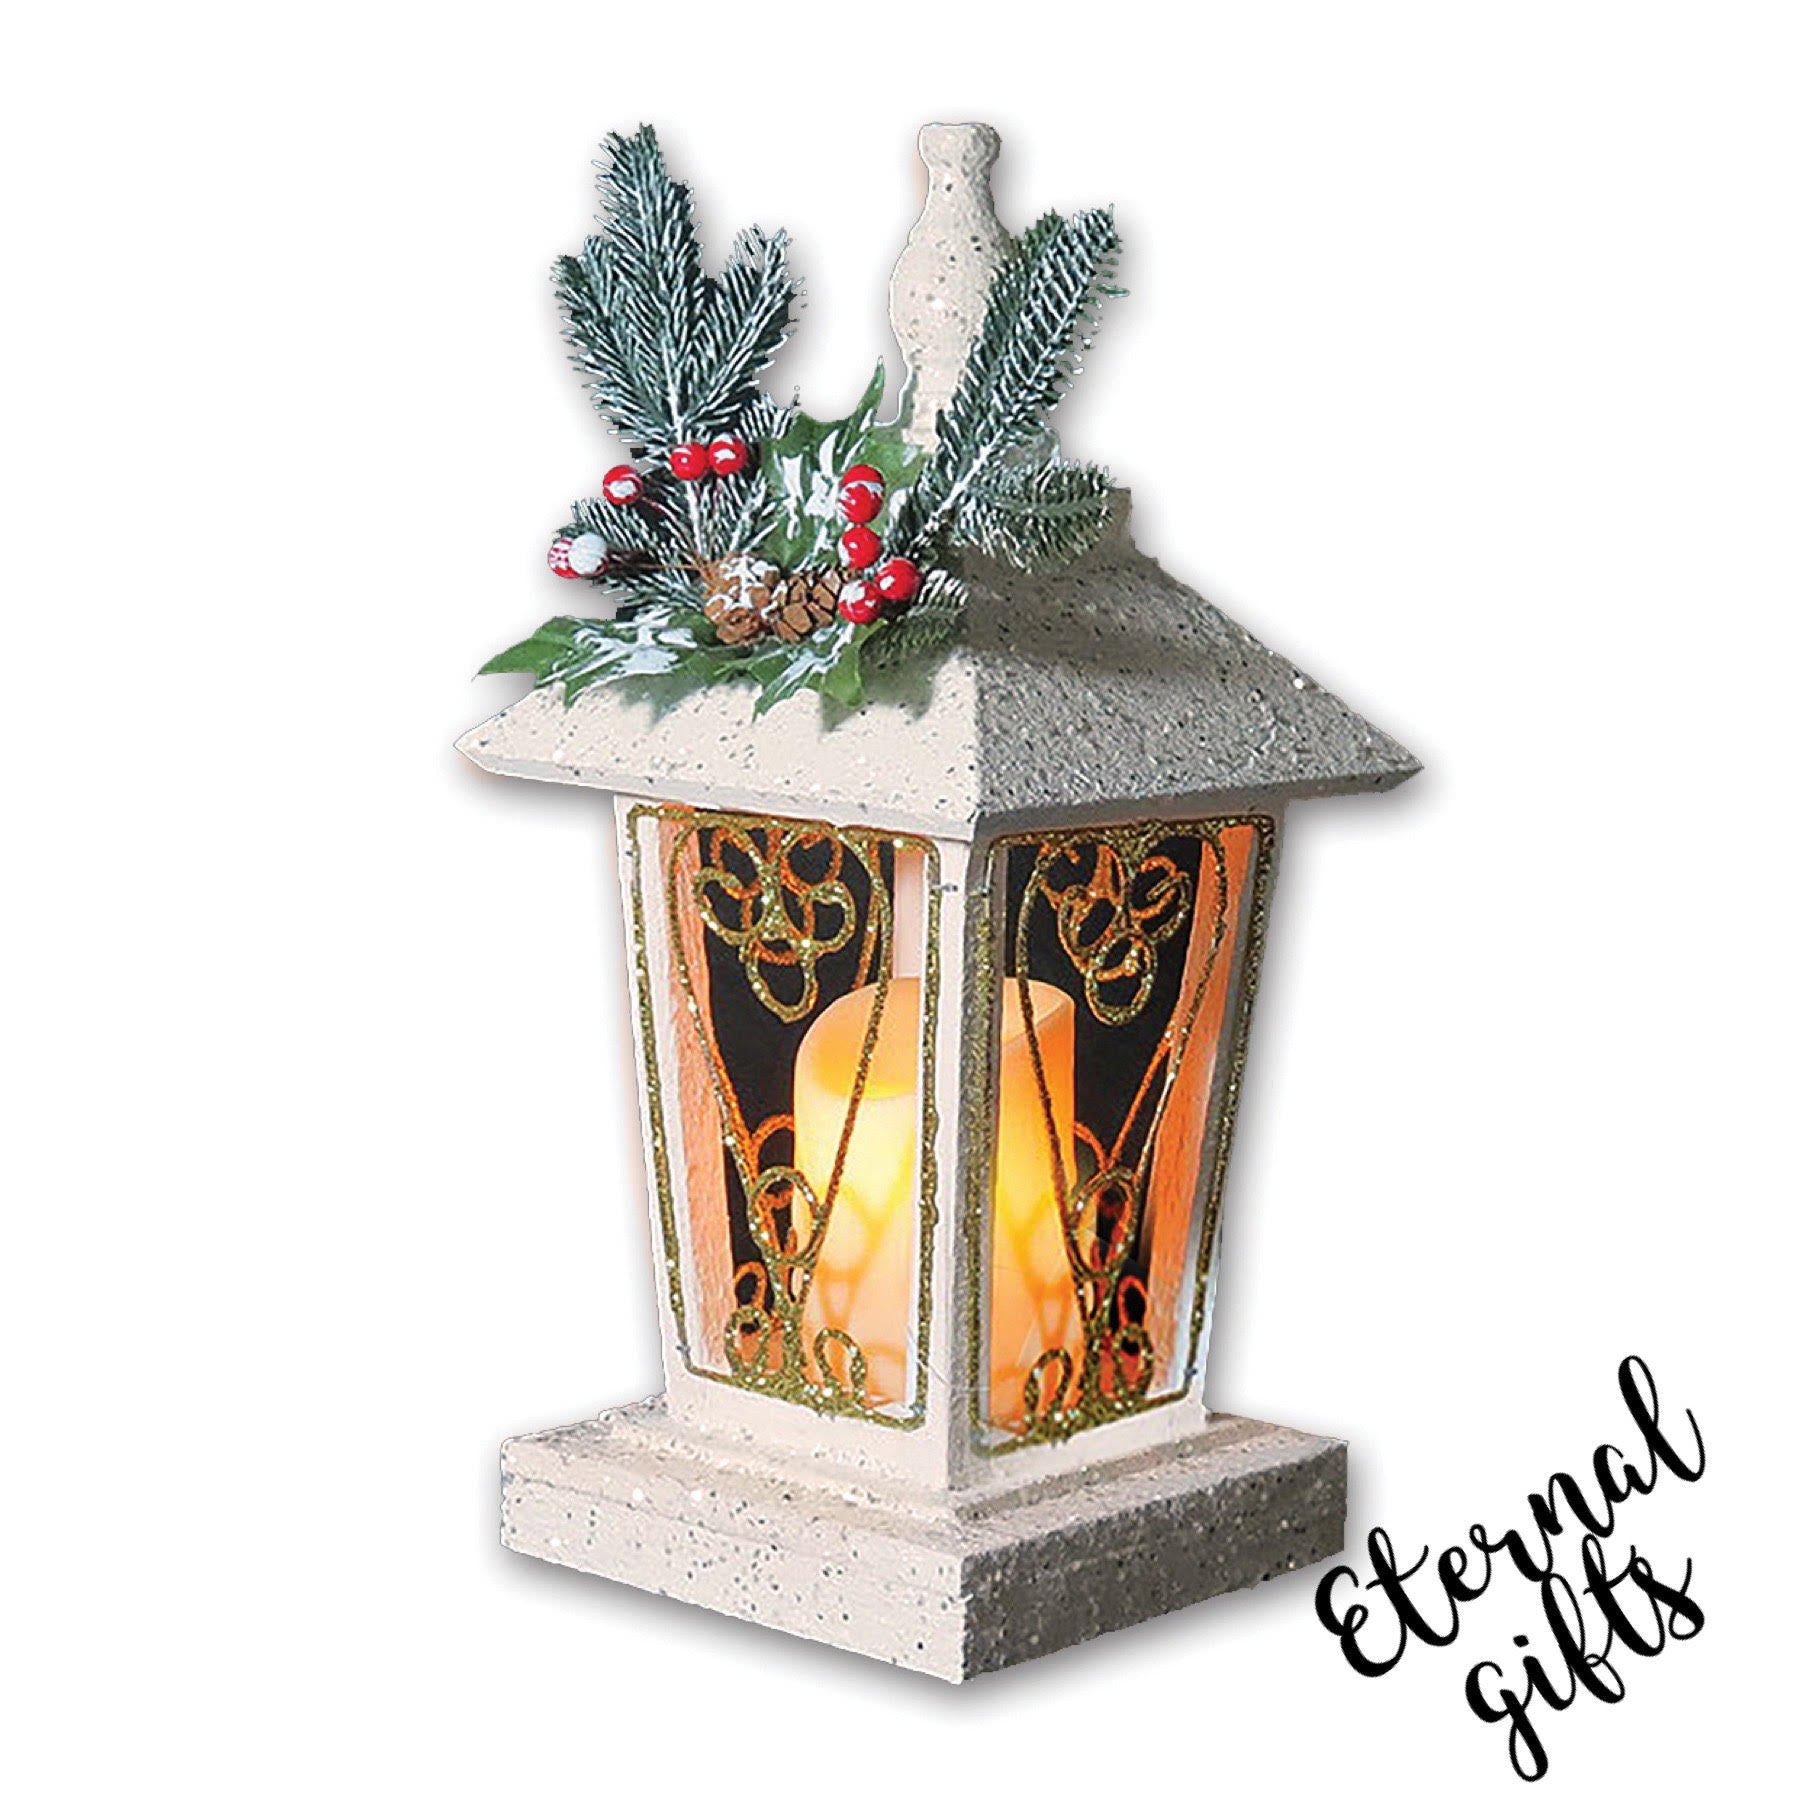 White Wooden Lantern with Flickering Candle decorated with Snow & Holly.